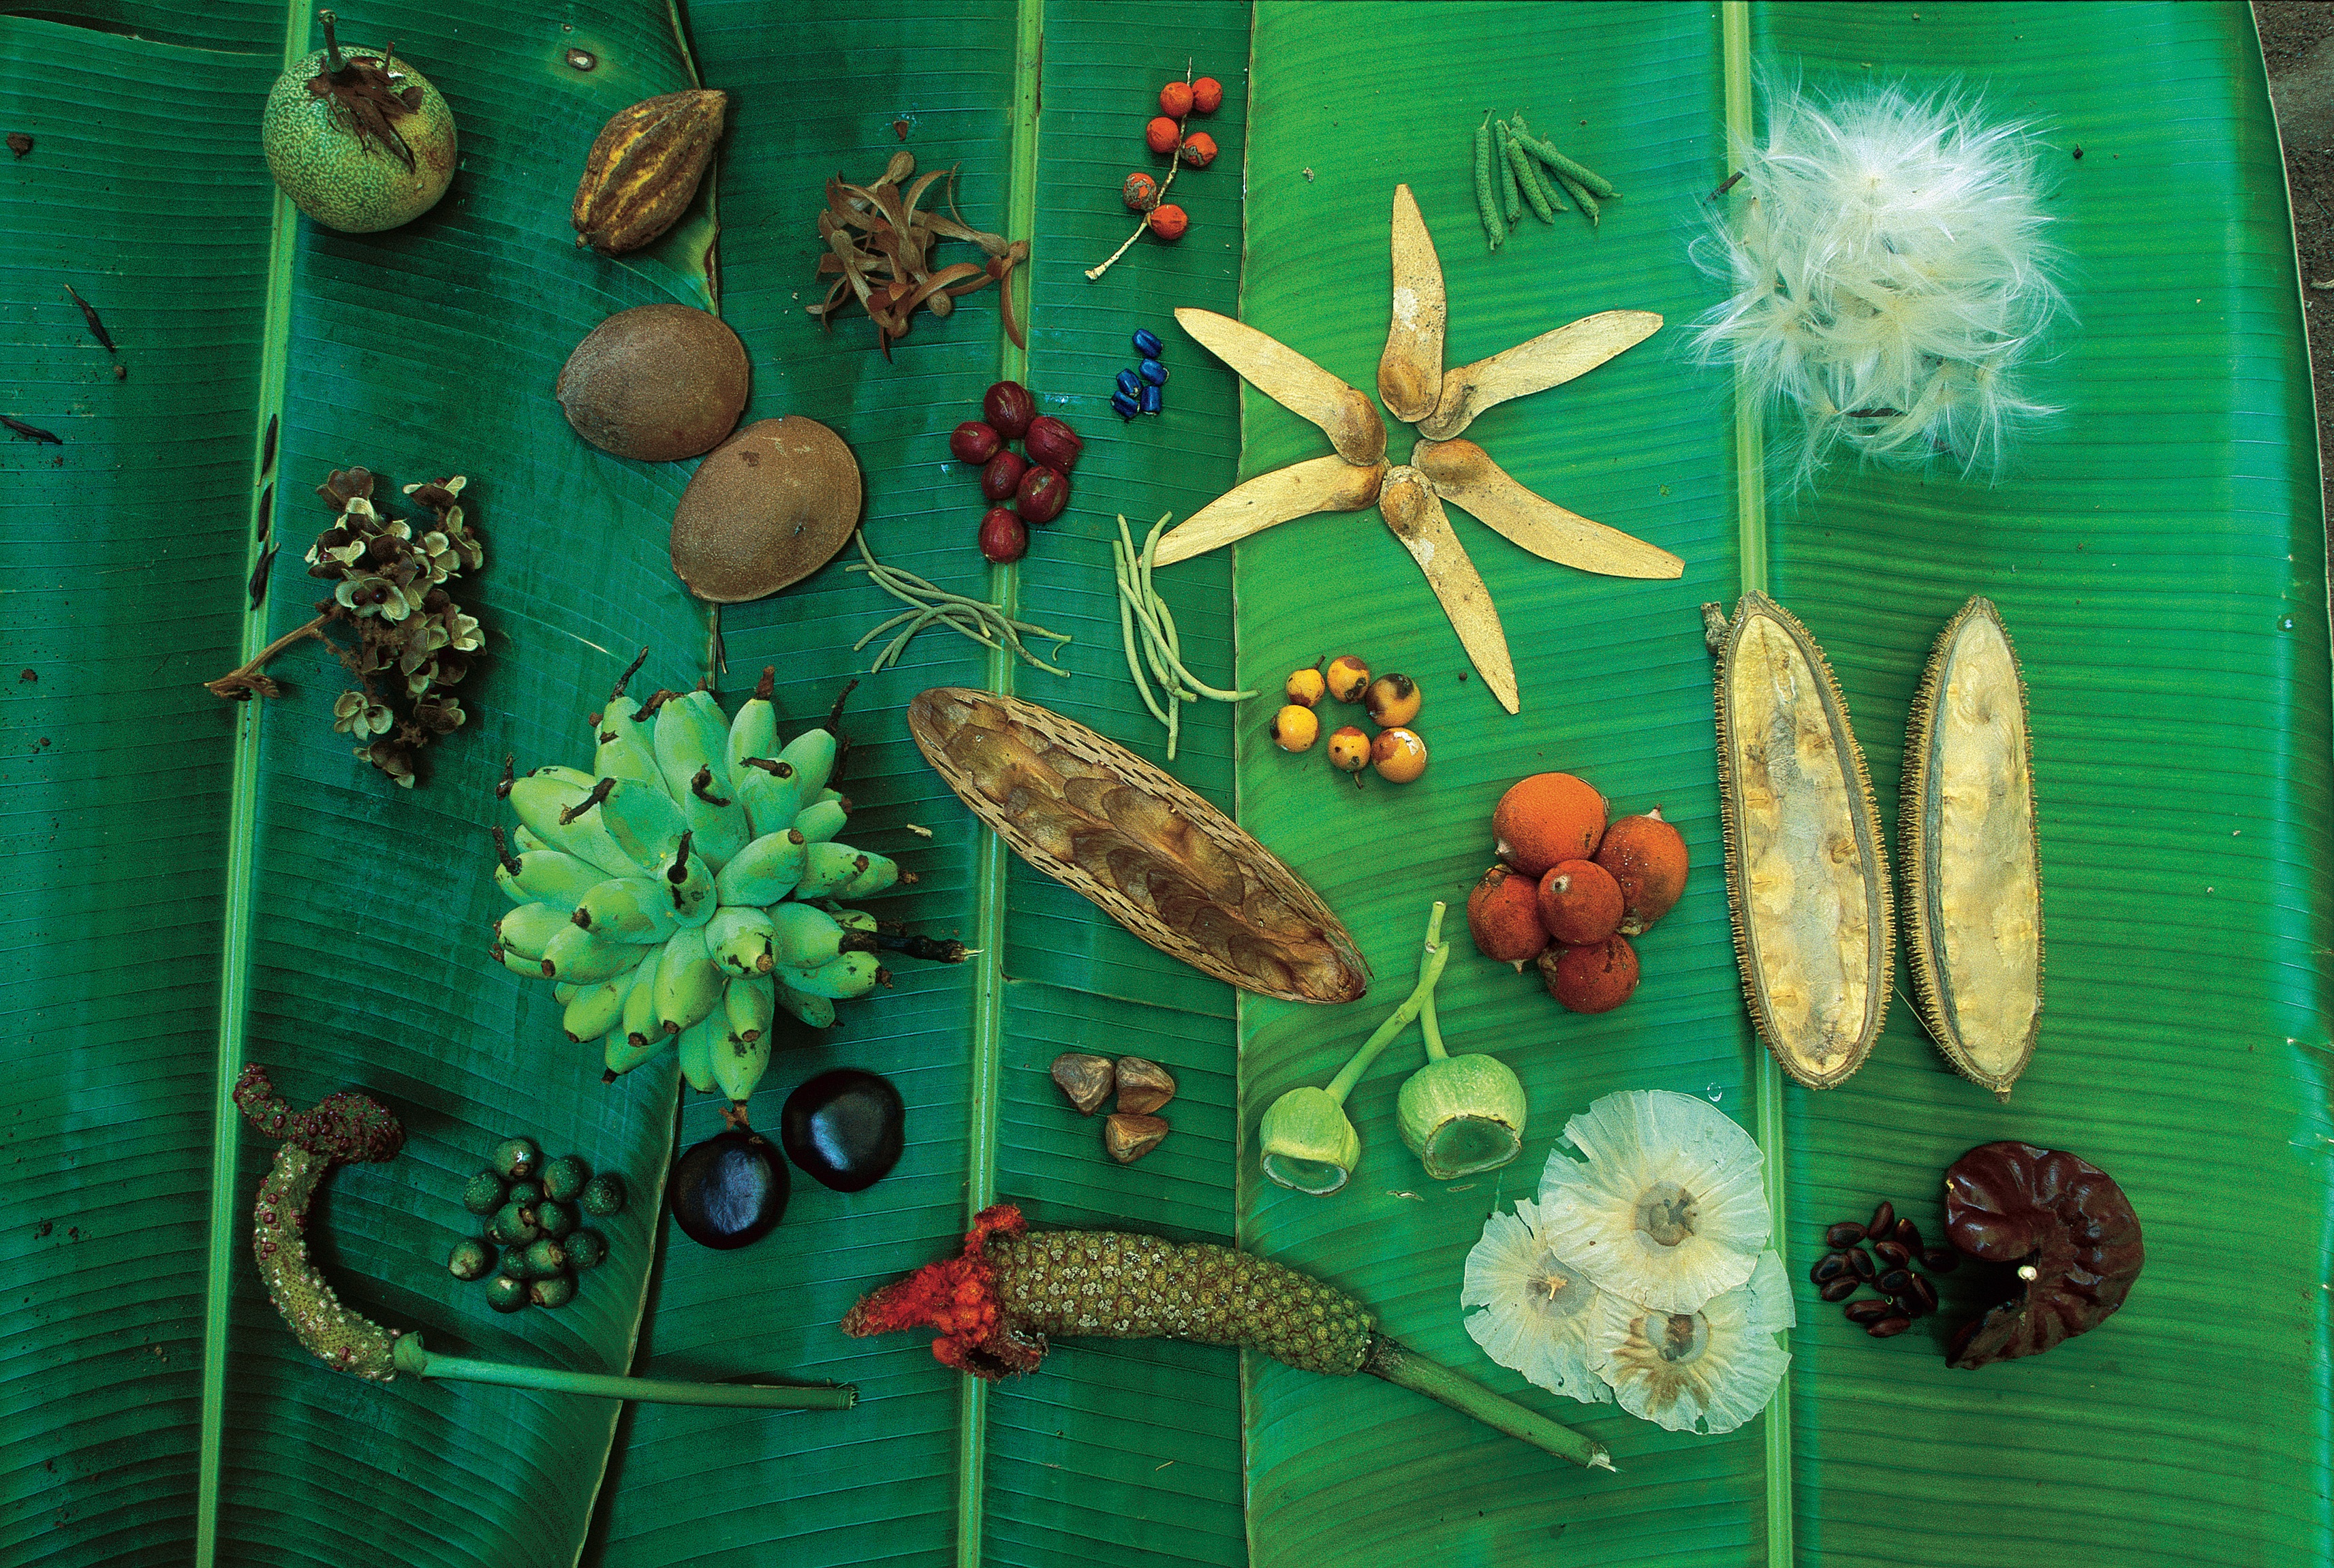 Seeds and fruits of various shapes, colors and sizes appear against a backdrop of large leaves